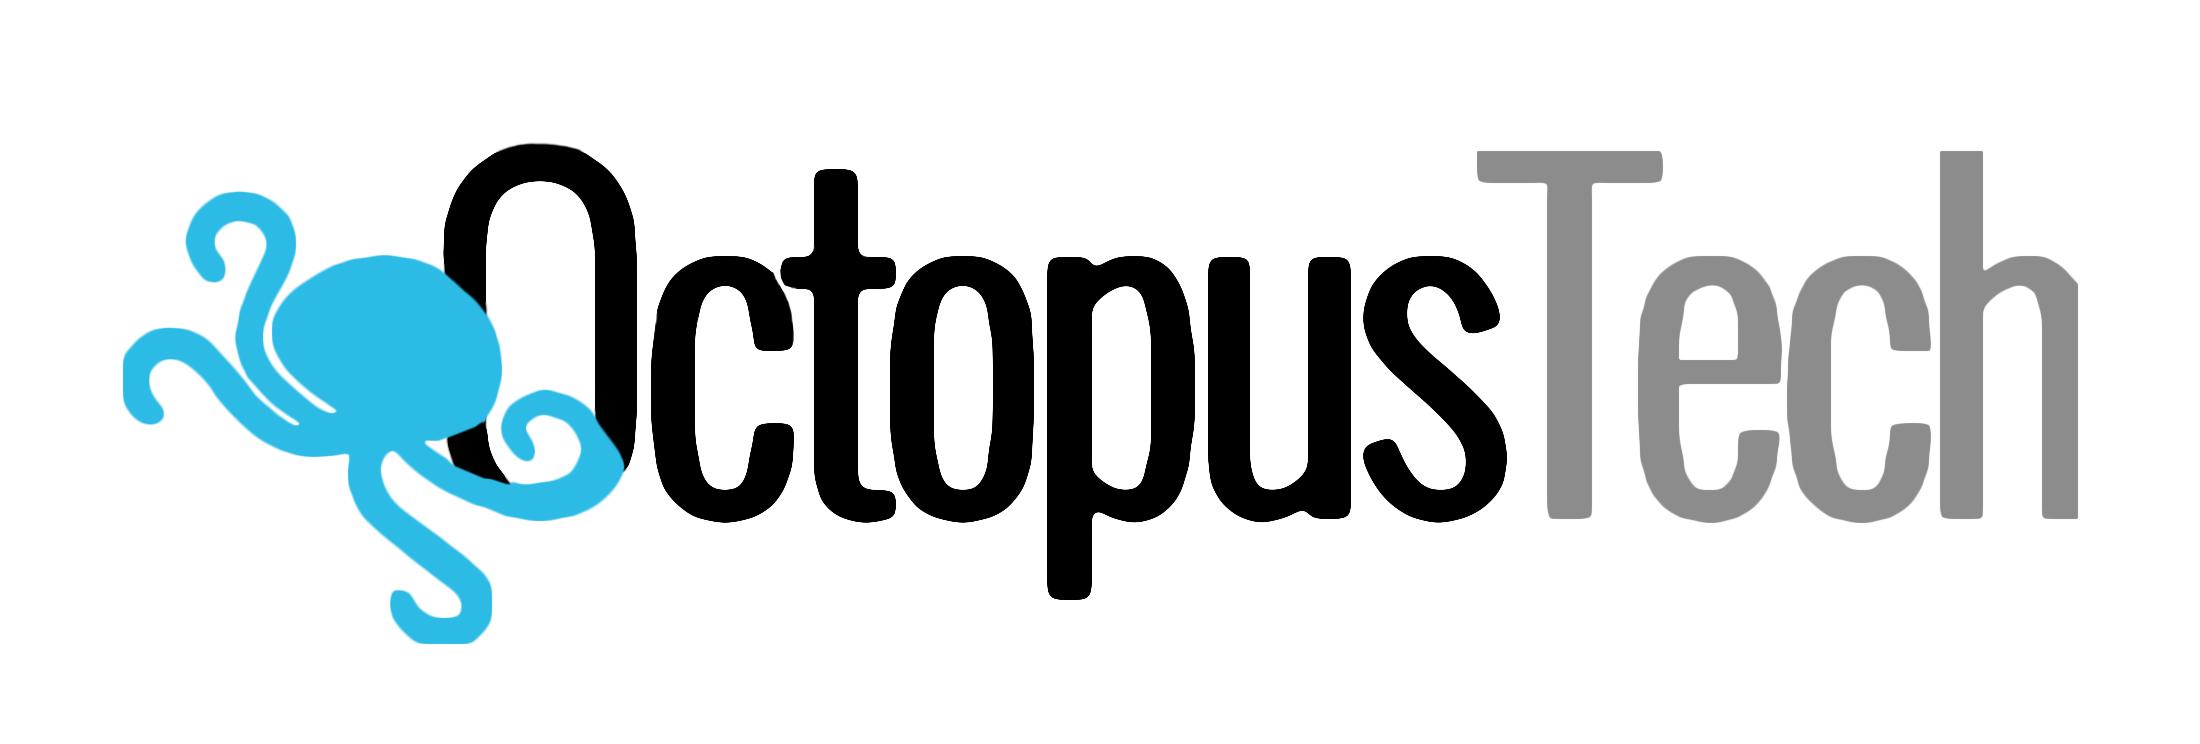 Octopus Tech Solutions profile on Qualified.One